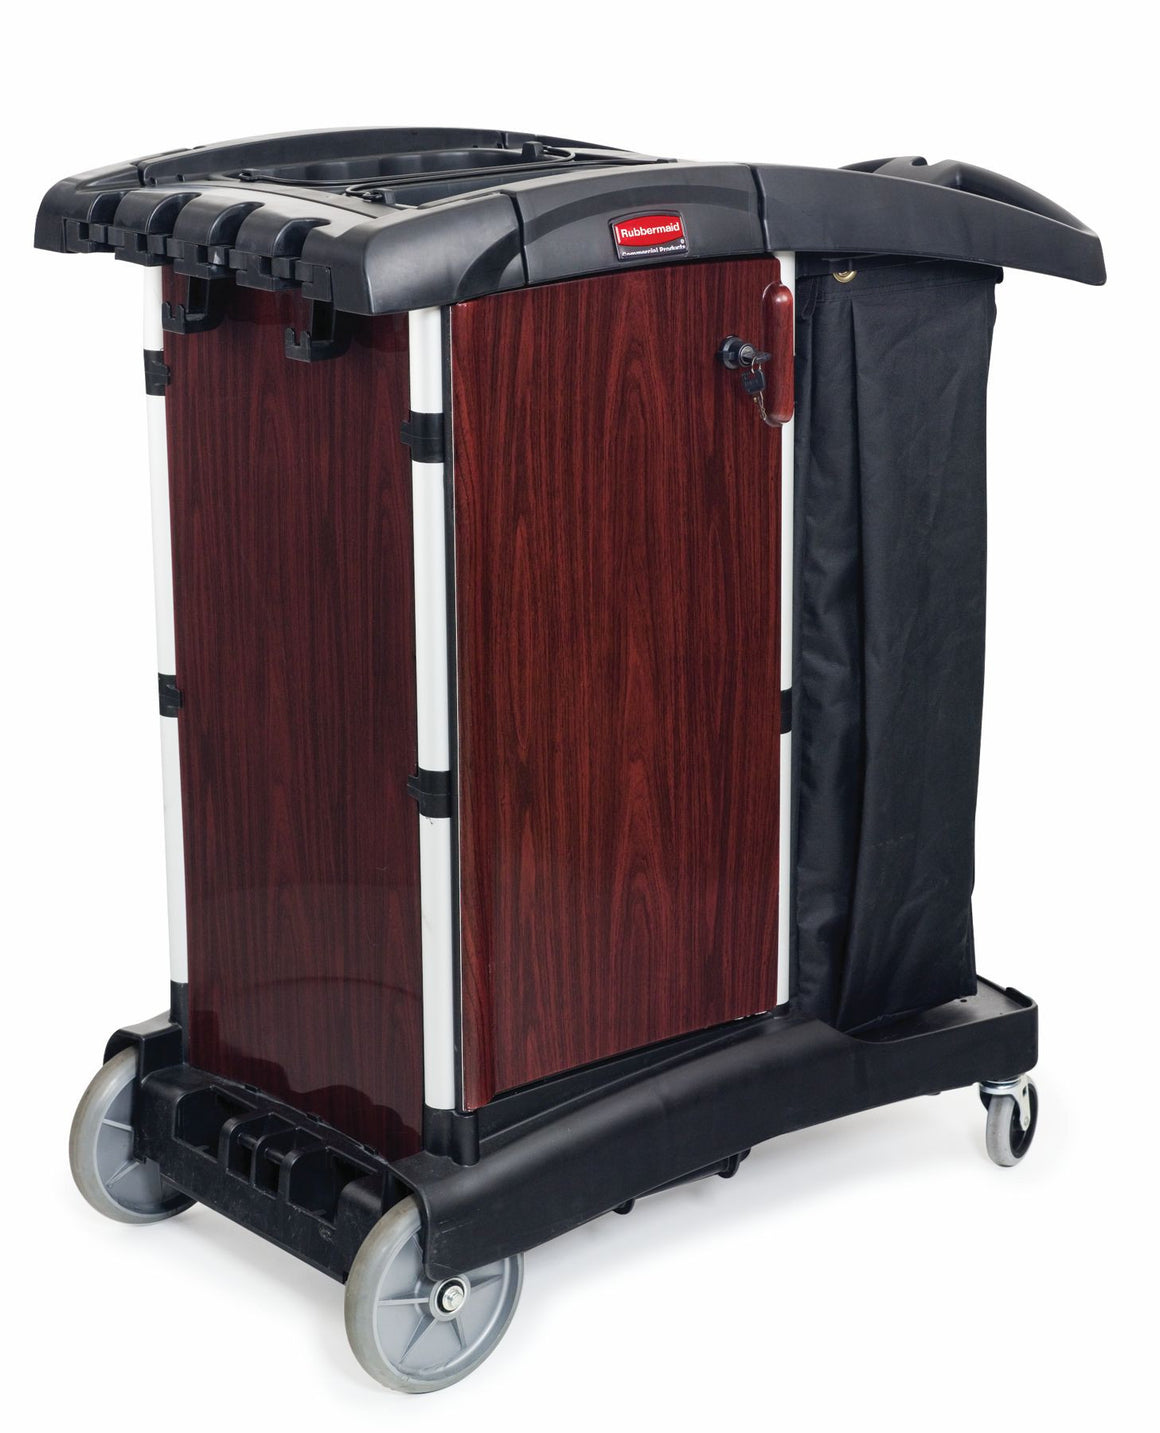 DELUXE PANELED COMPACT HOUSEKEEPING CART